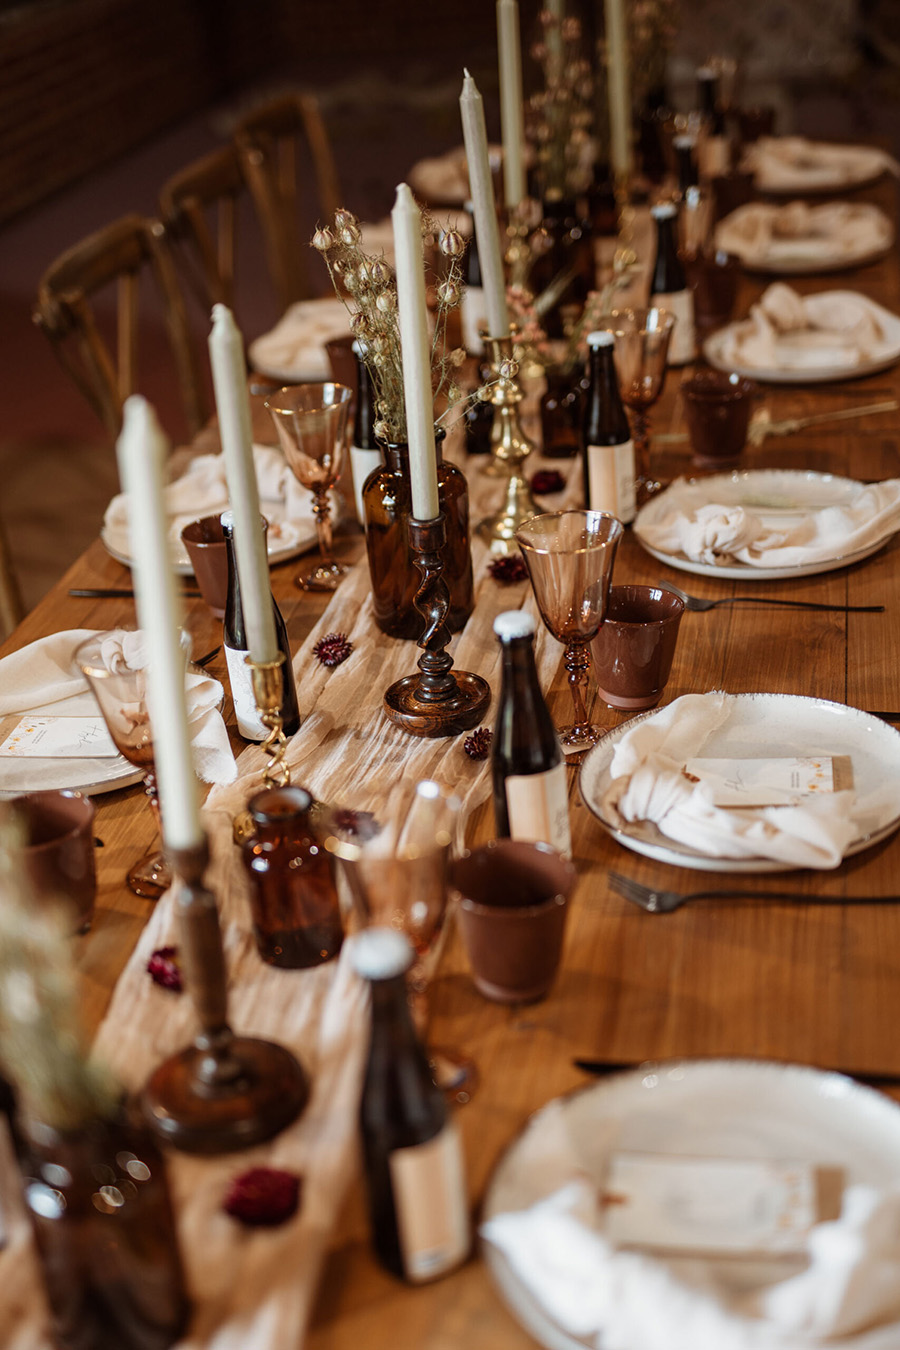 Elegant rustic modern wedding table, set with natural candles in amber glassware. Photographer credit Sarah Hoyle, styling by Amethyst Weddings